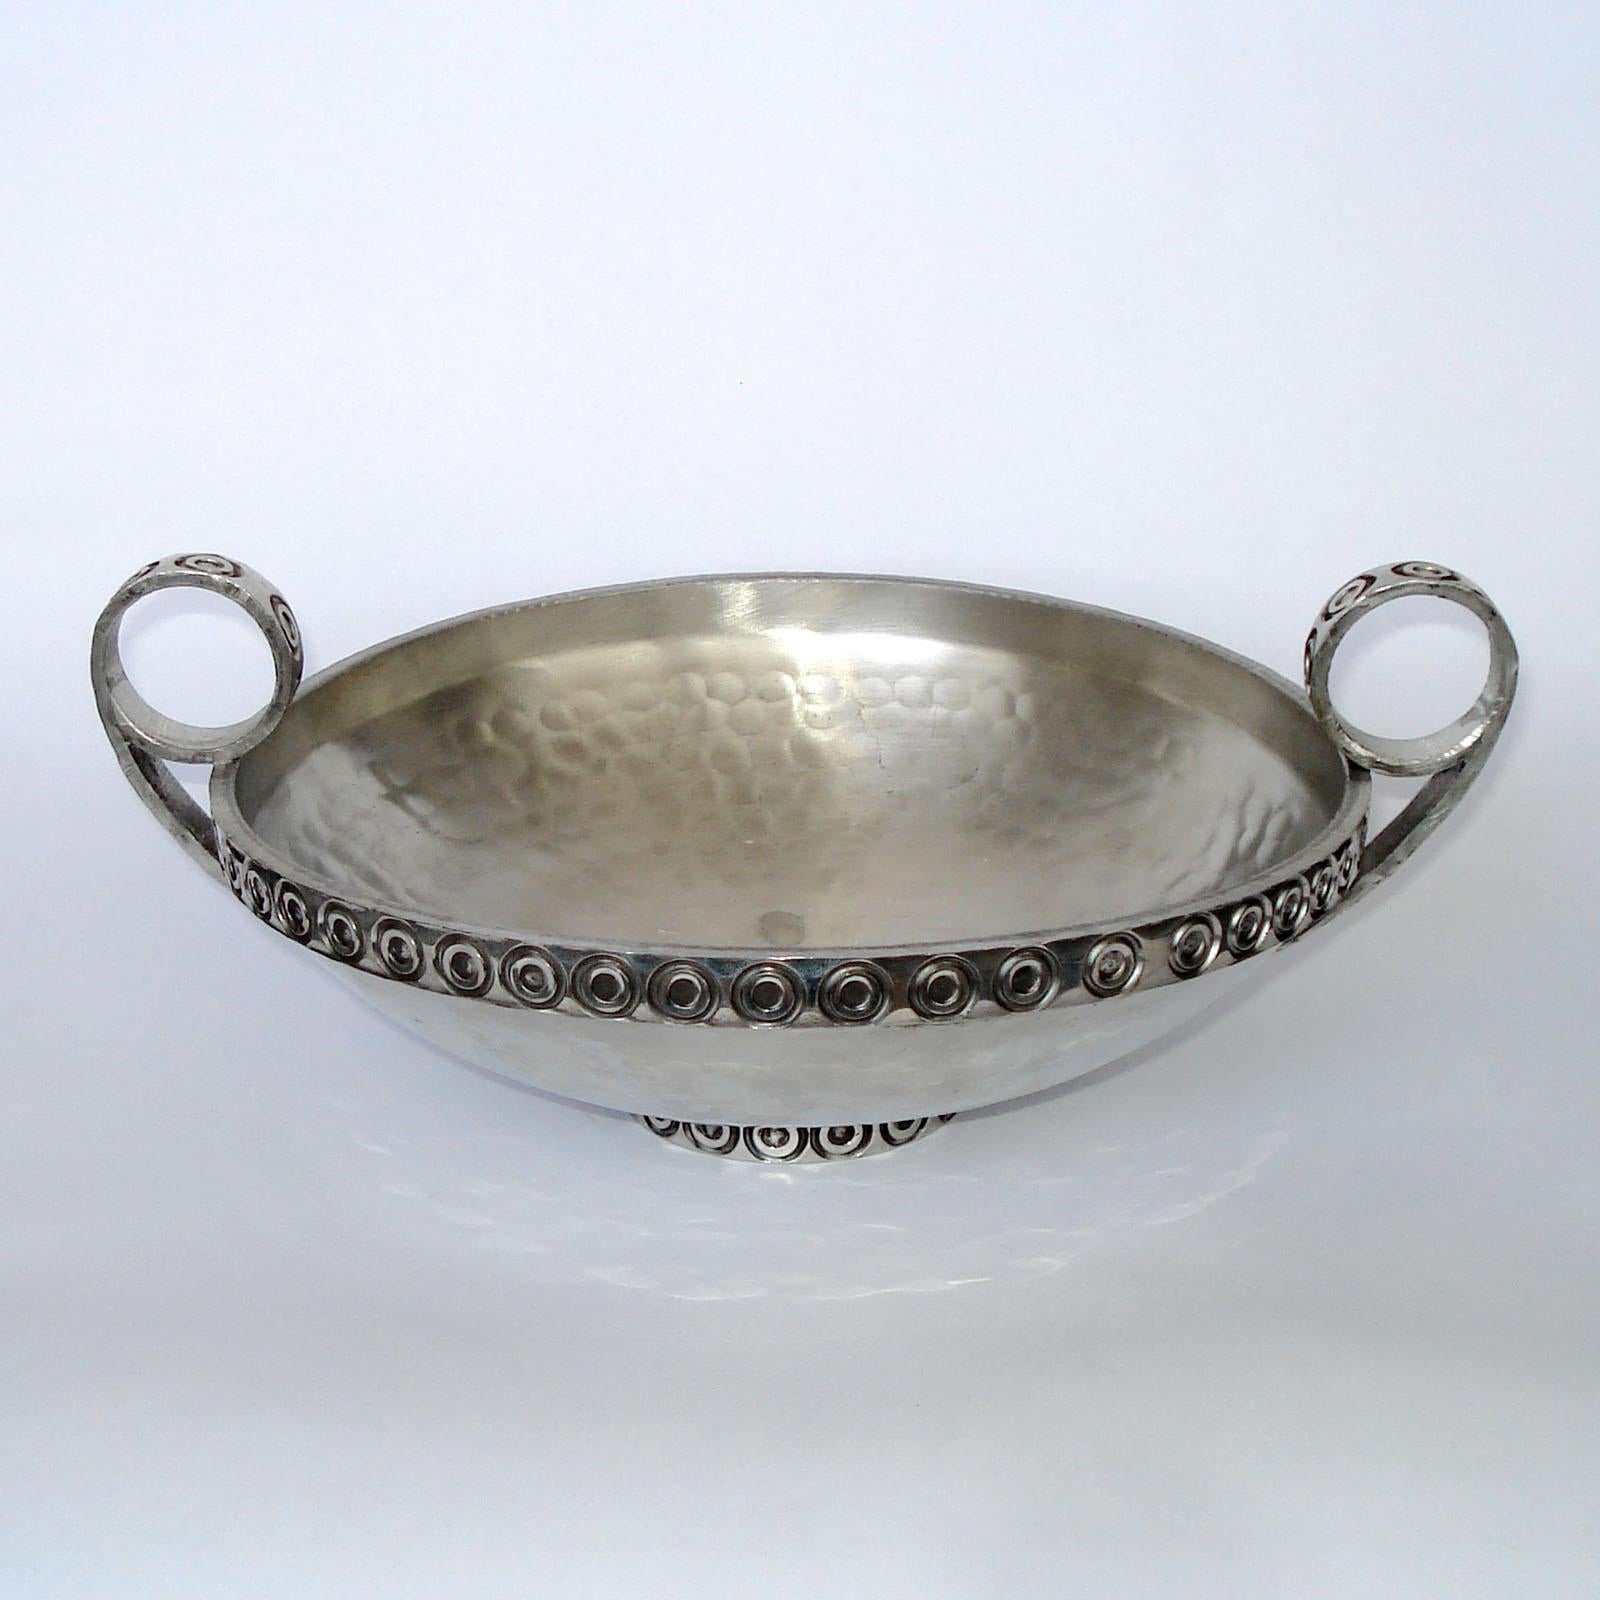 Hammered Art Deco Rare Handled Pewter Bowl, Norway, 1940s